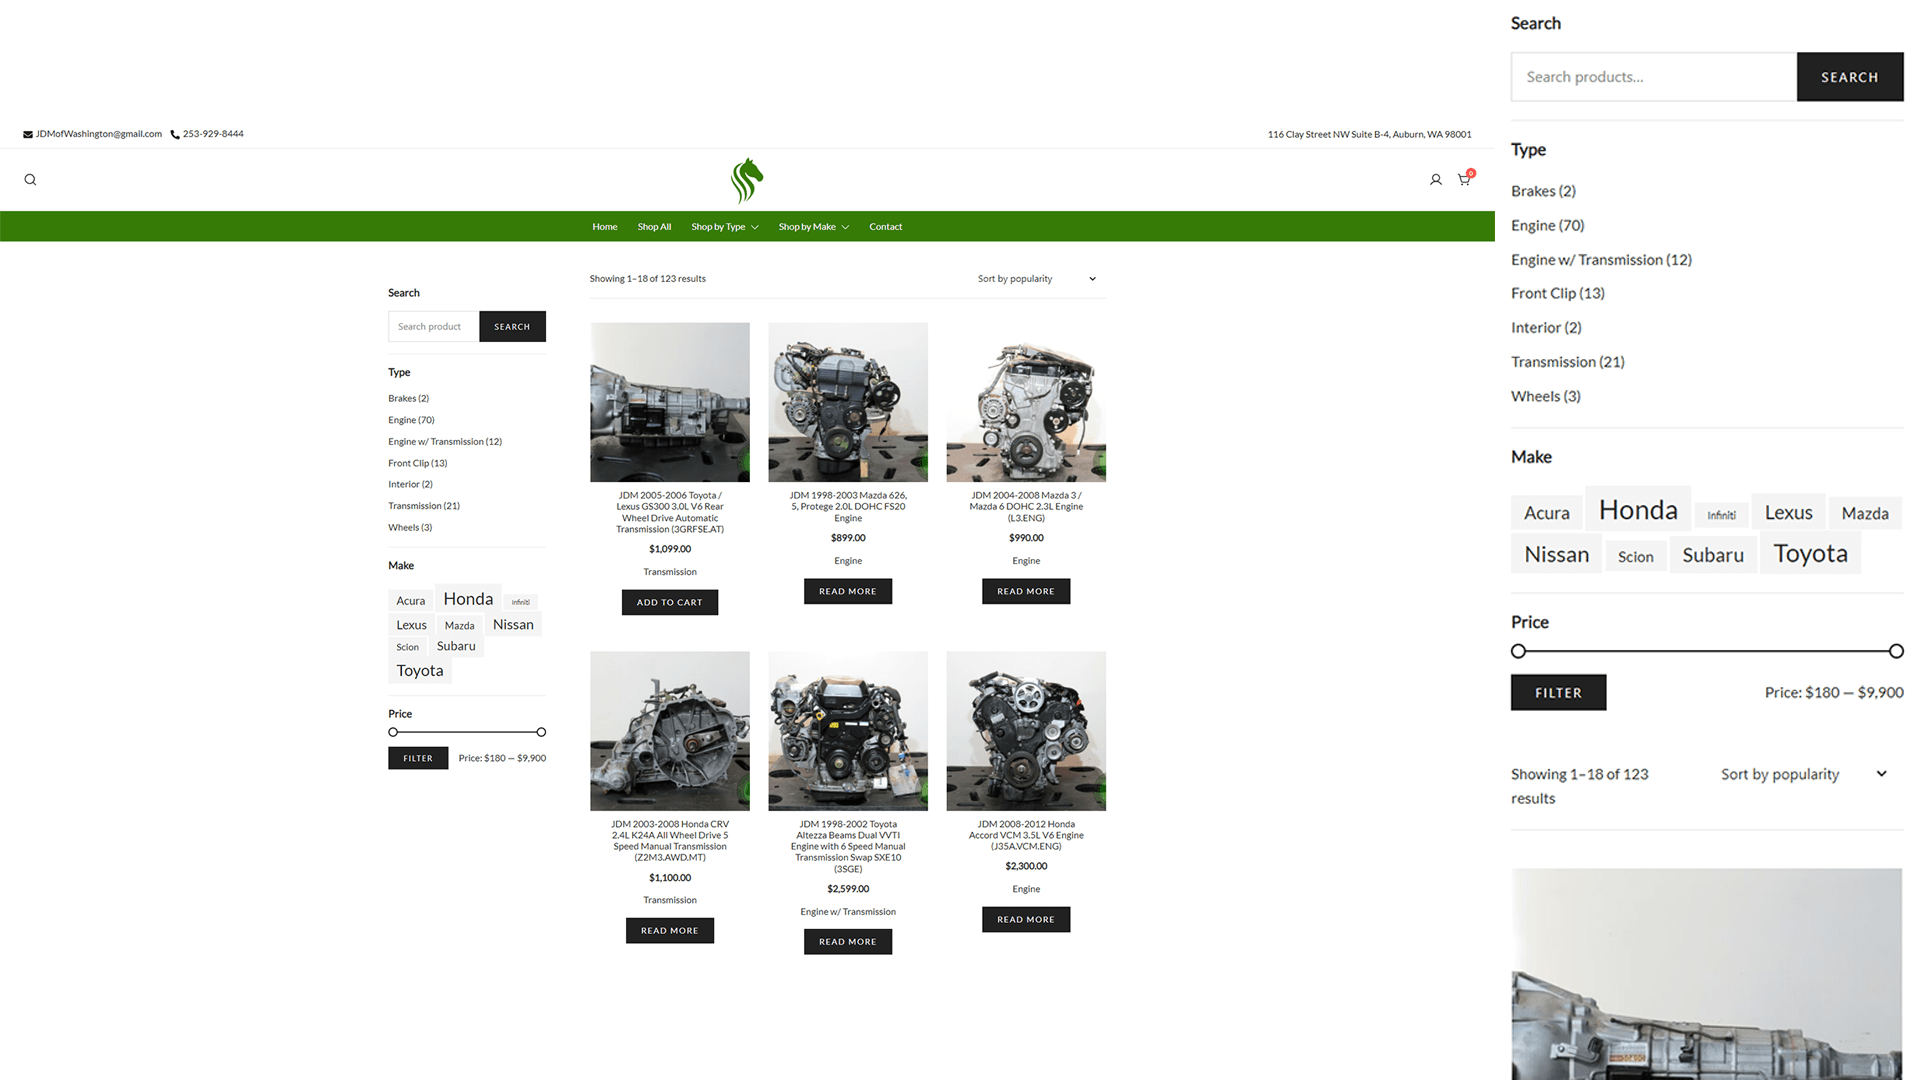 JDM of Washington – Desktop and mobile device screenshots of the product listing/search/filtering webpage